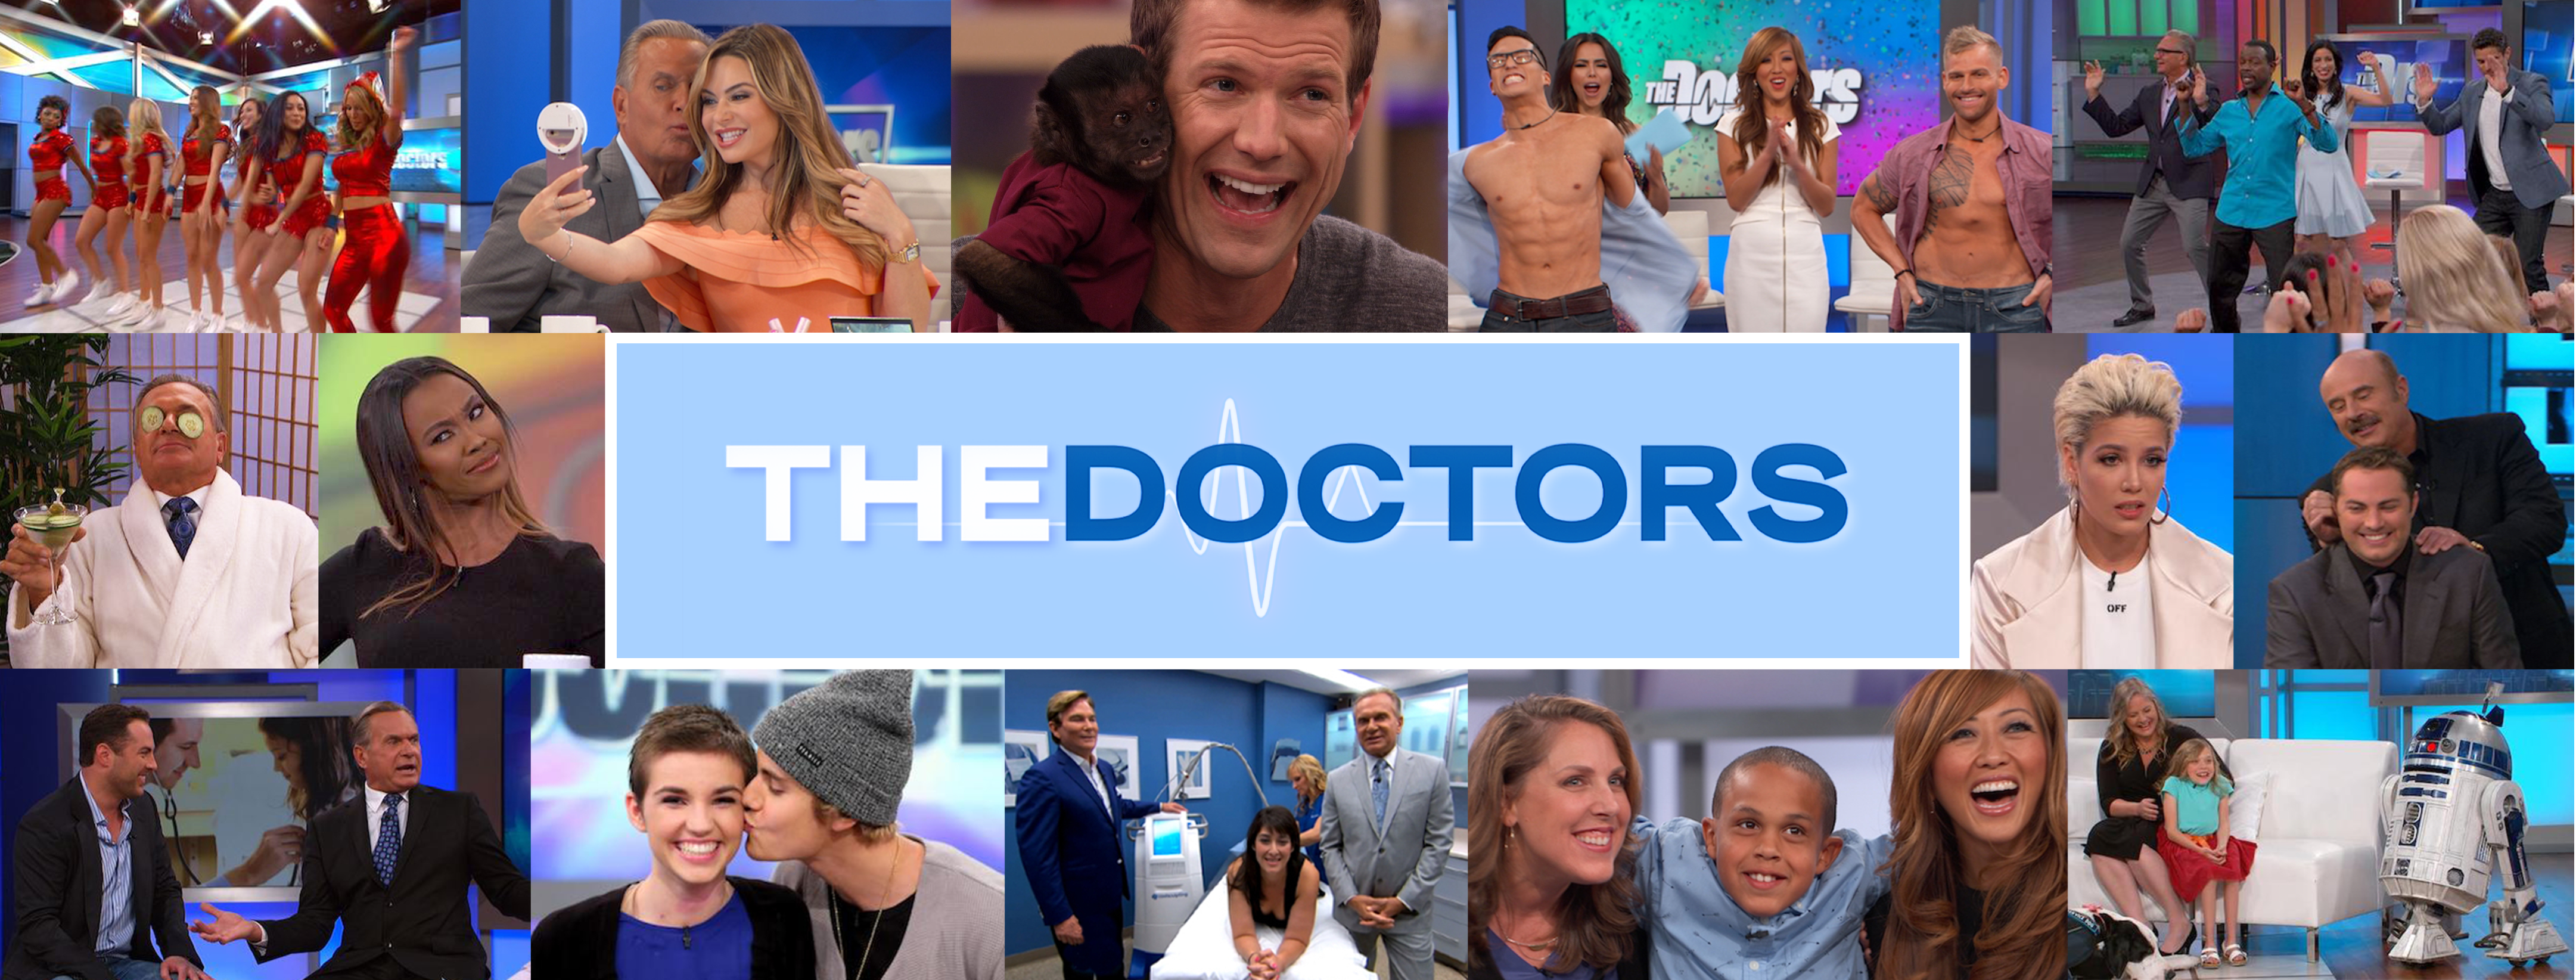 Jumping Jacks The Doctors Tv Show